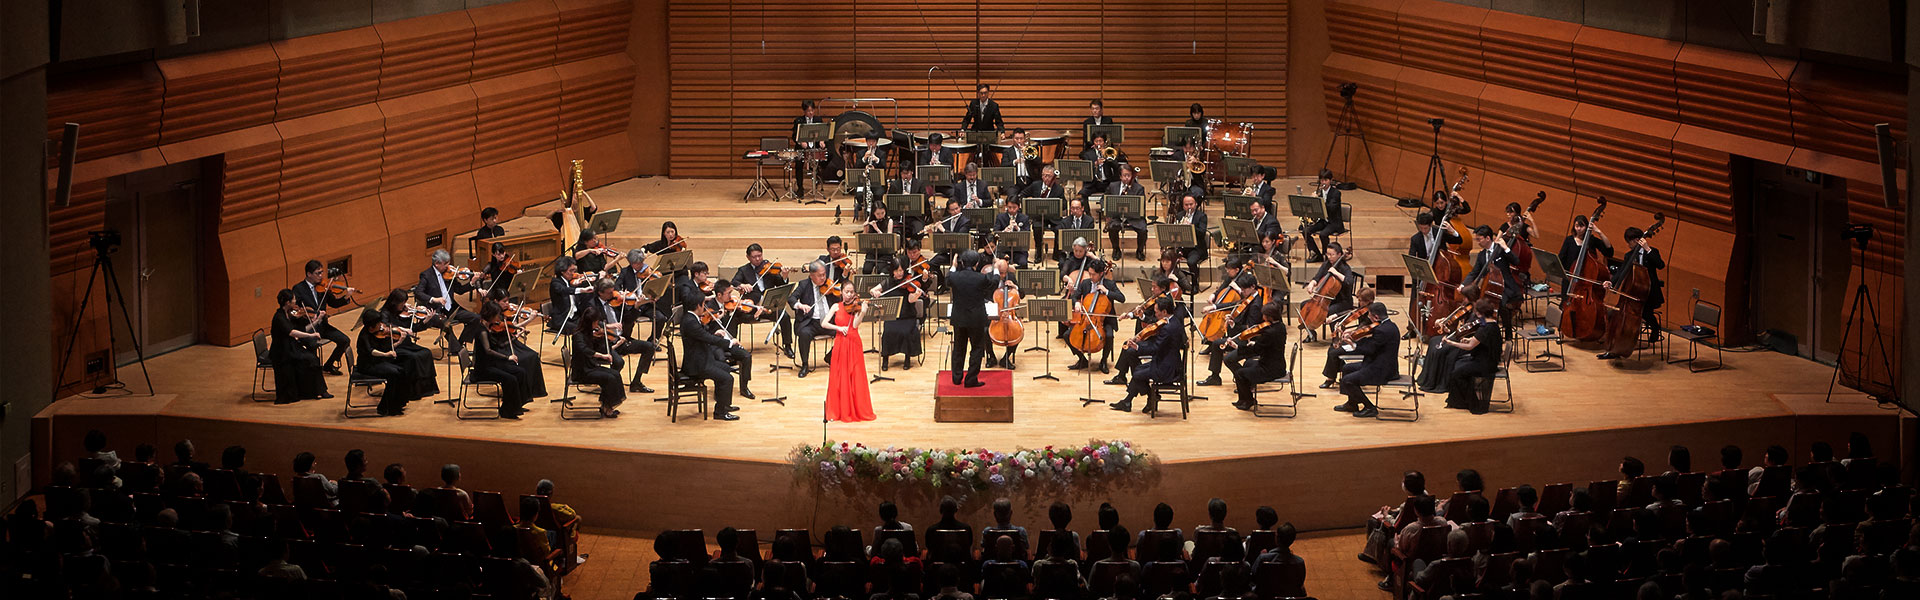 Japan Philharmonic Orchestra Sunday Concert Special | Sendai International Music Competition Official Website